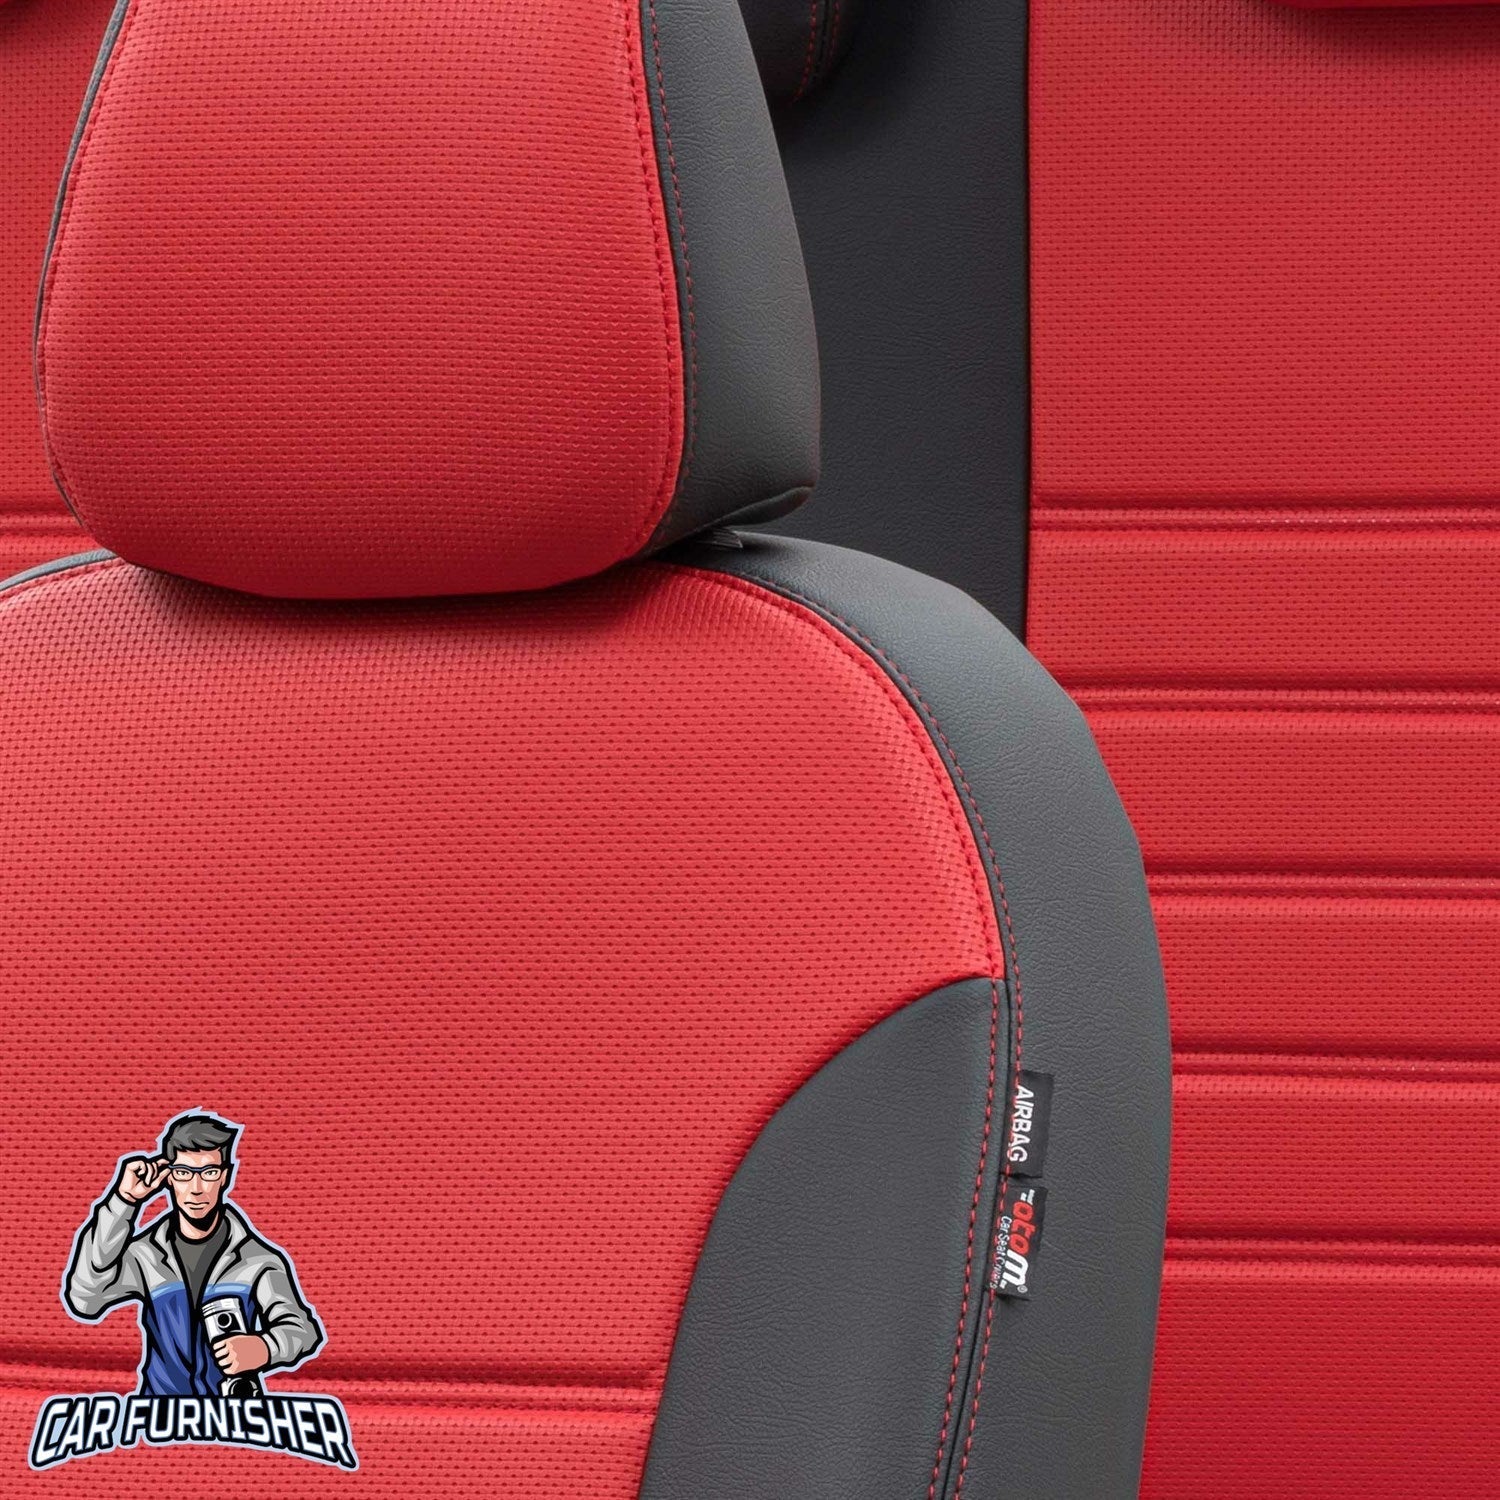 Fiat Linea Car Seat Covers 2007-2017 New York Design Red Full Set (5 Seats + Handrest) Leather & Fabric